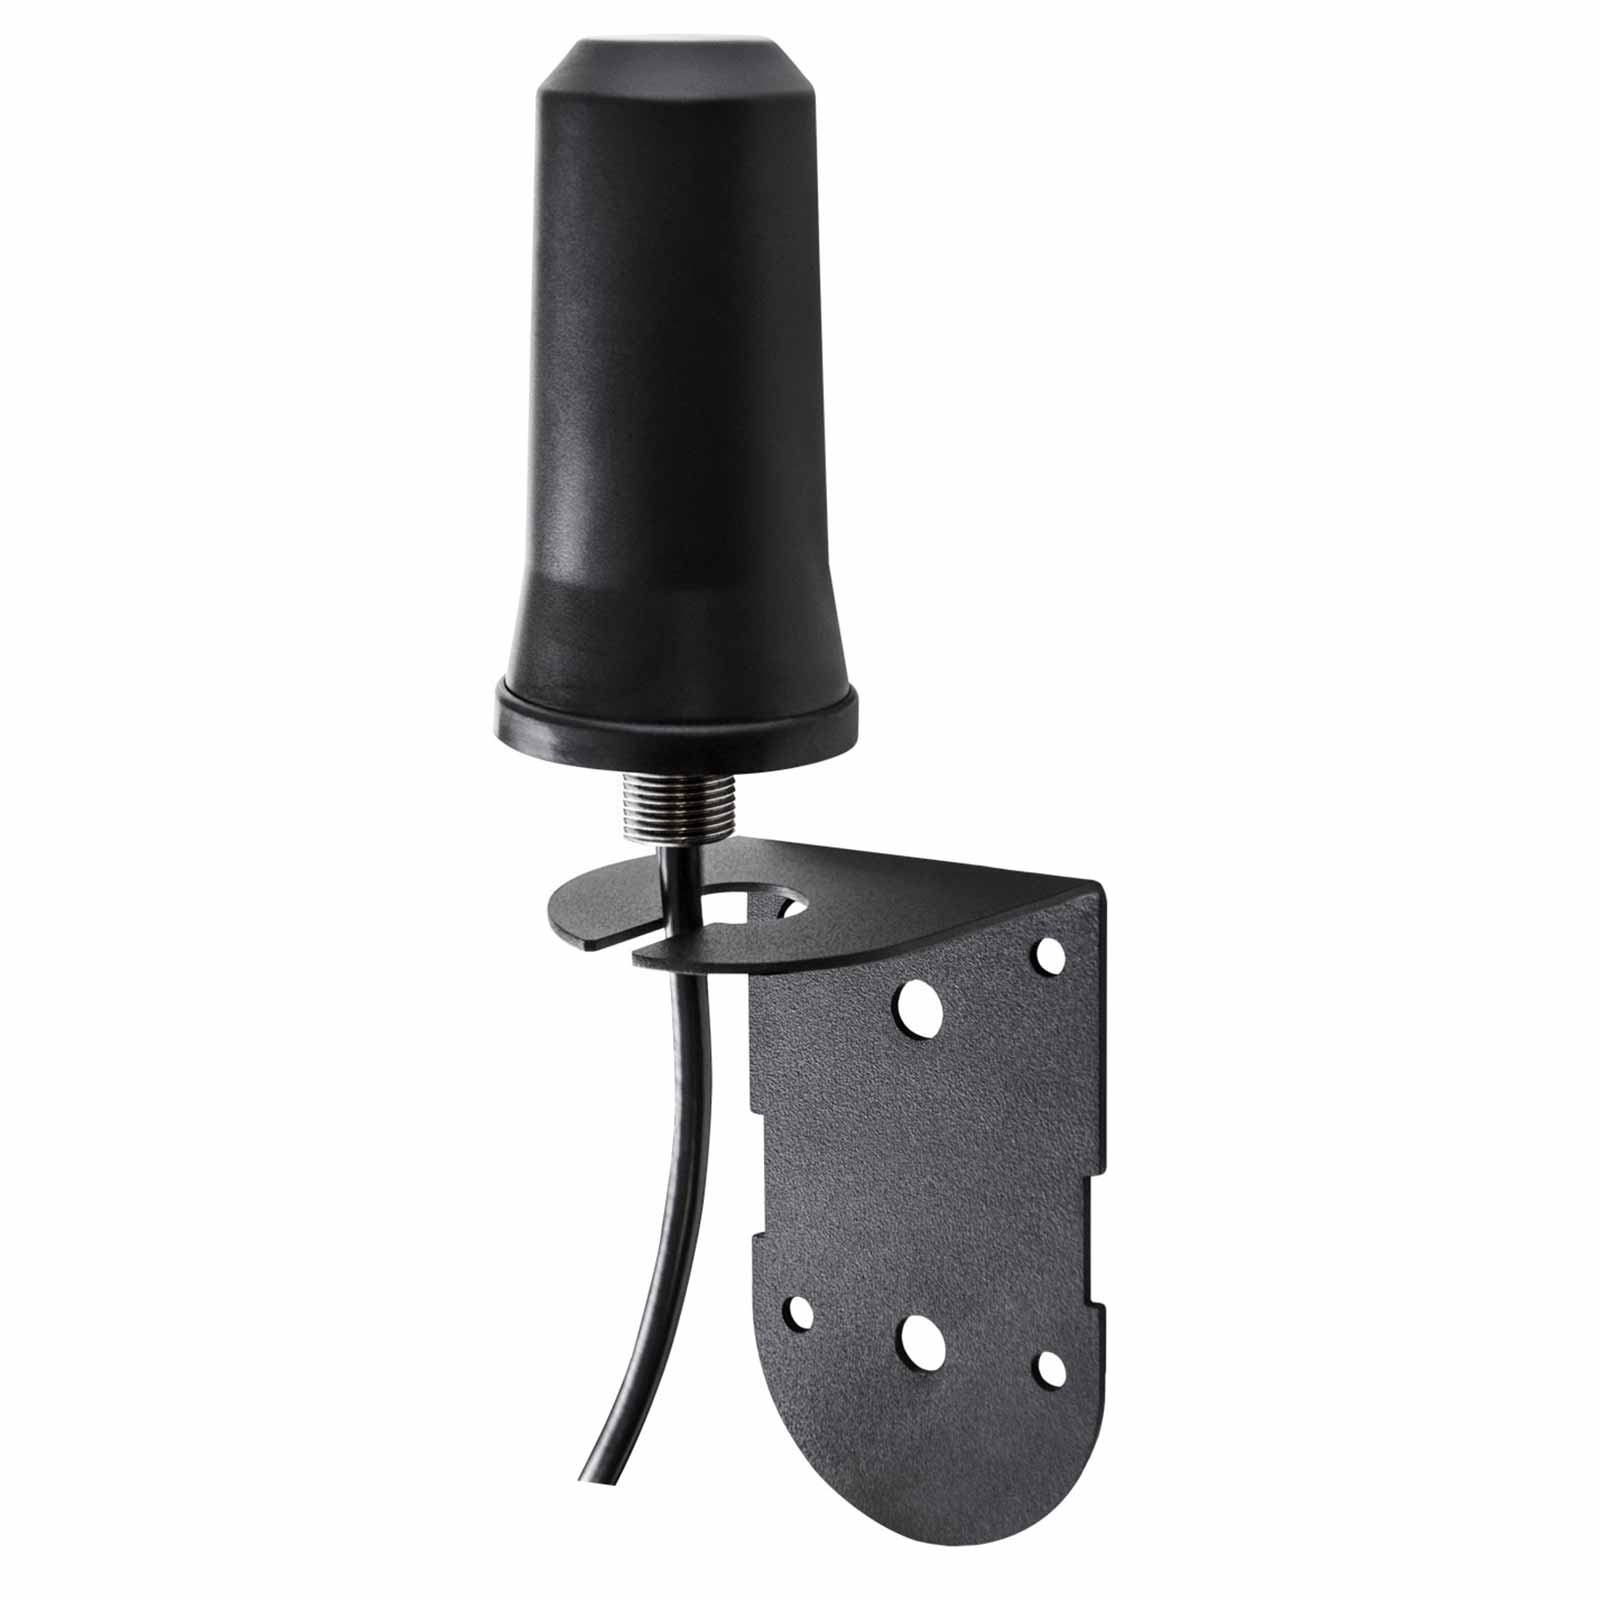 Spypoint Ca-01 Antenna for trail cameras